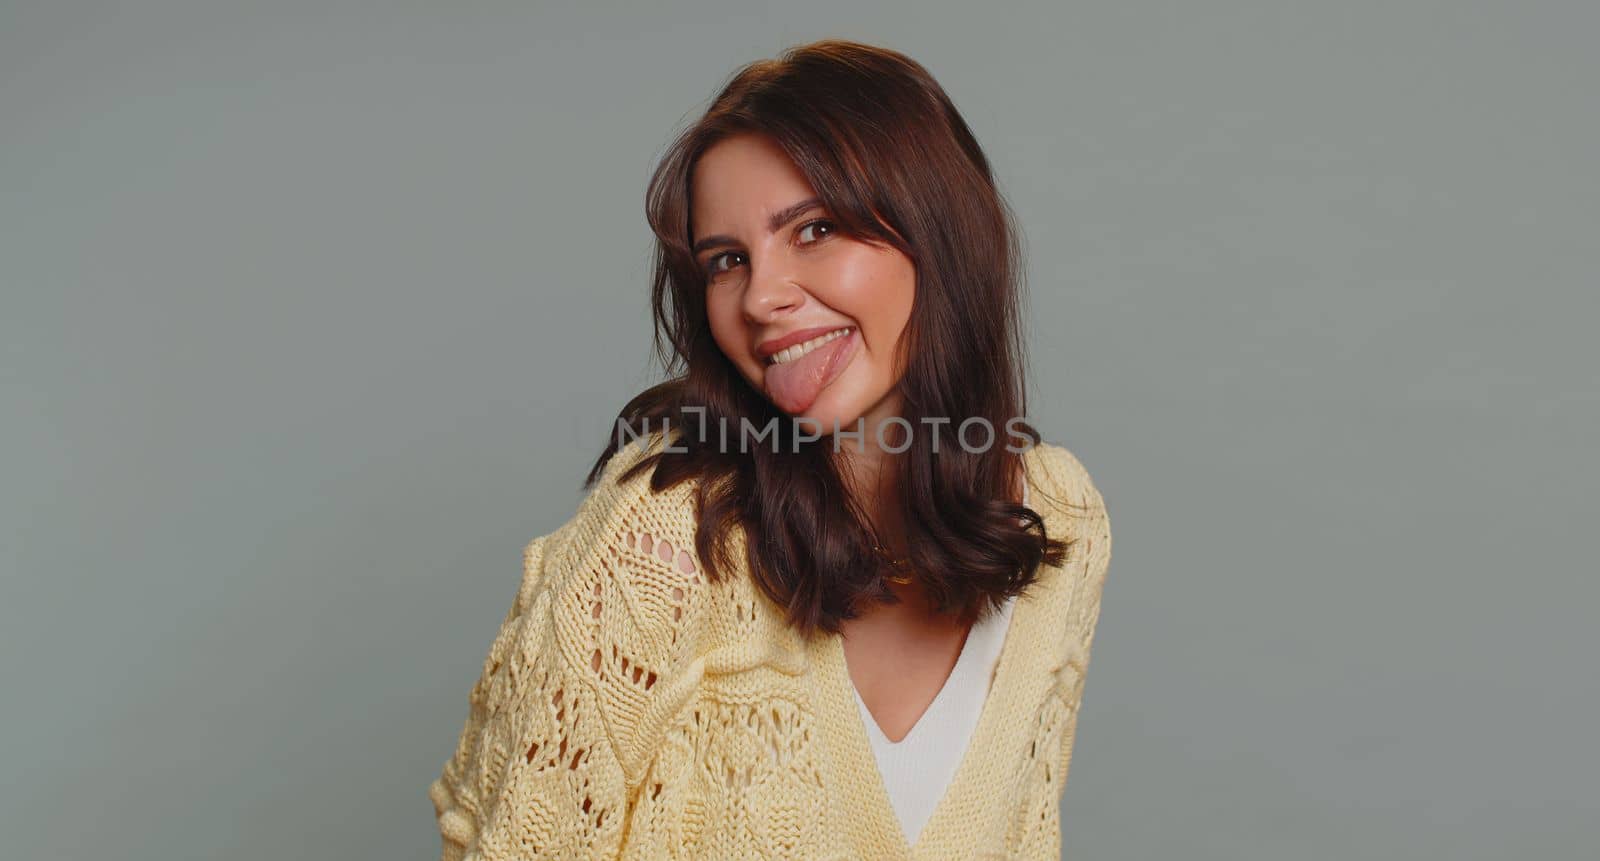 Funny joyful sincere woman 20 years old in cardigan making playful silly facial expressions and grimacing, fooling around showing tongue. Young lovely pretty girl isolated alone on gray background